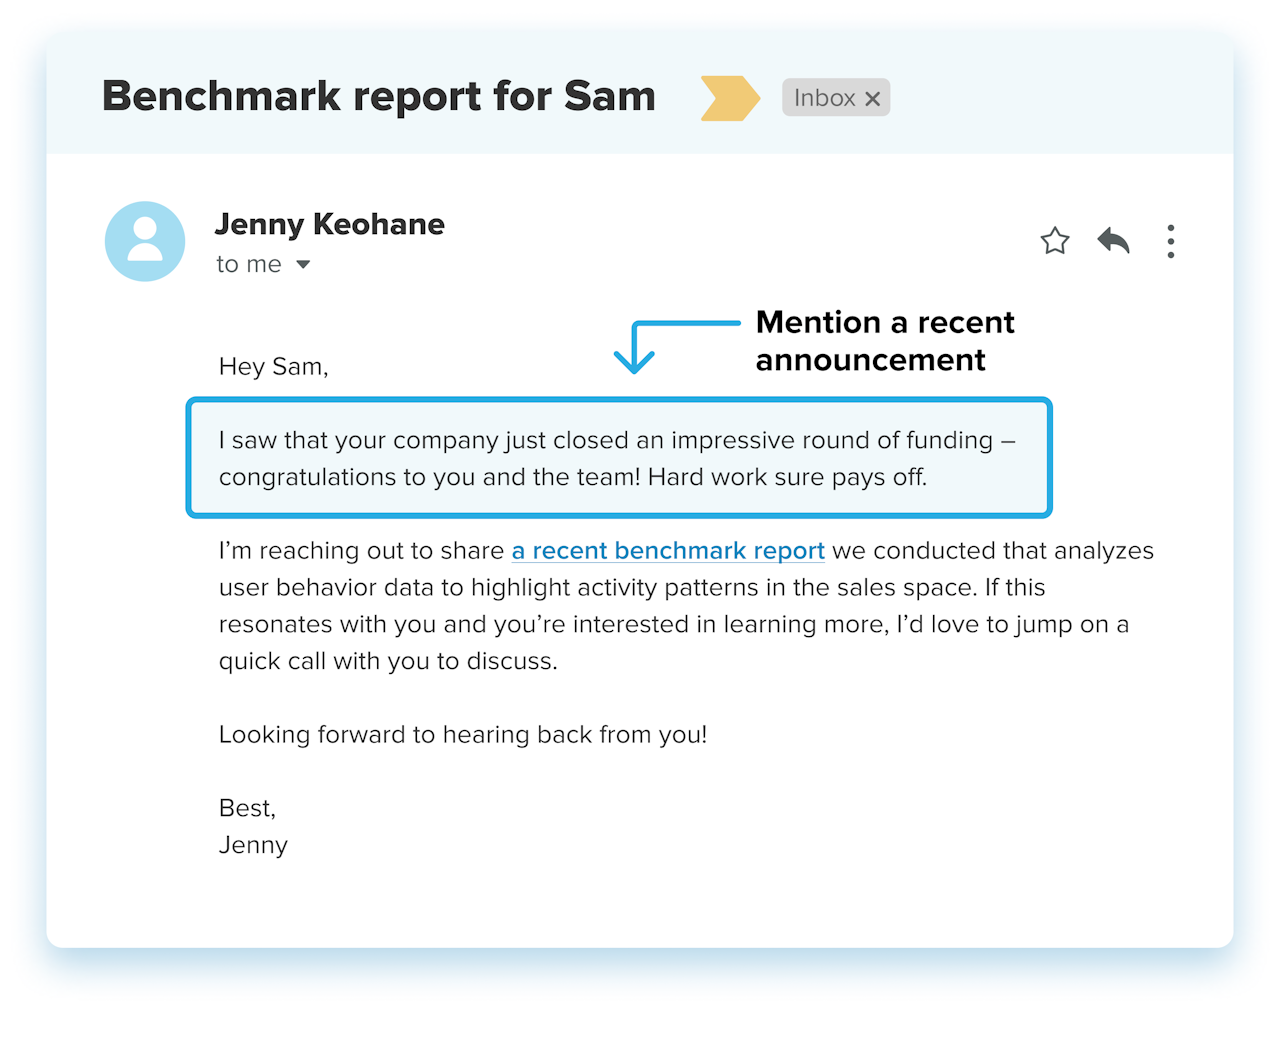 personalized email example: mention a recent announcement